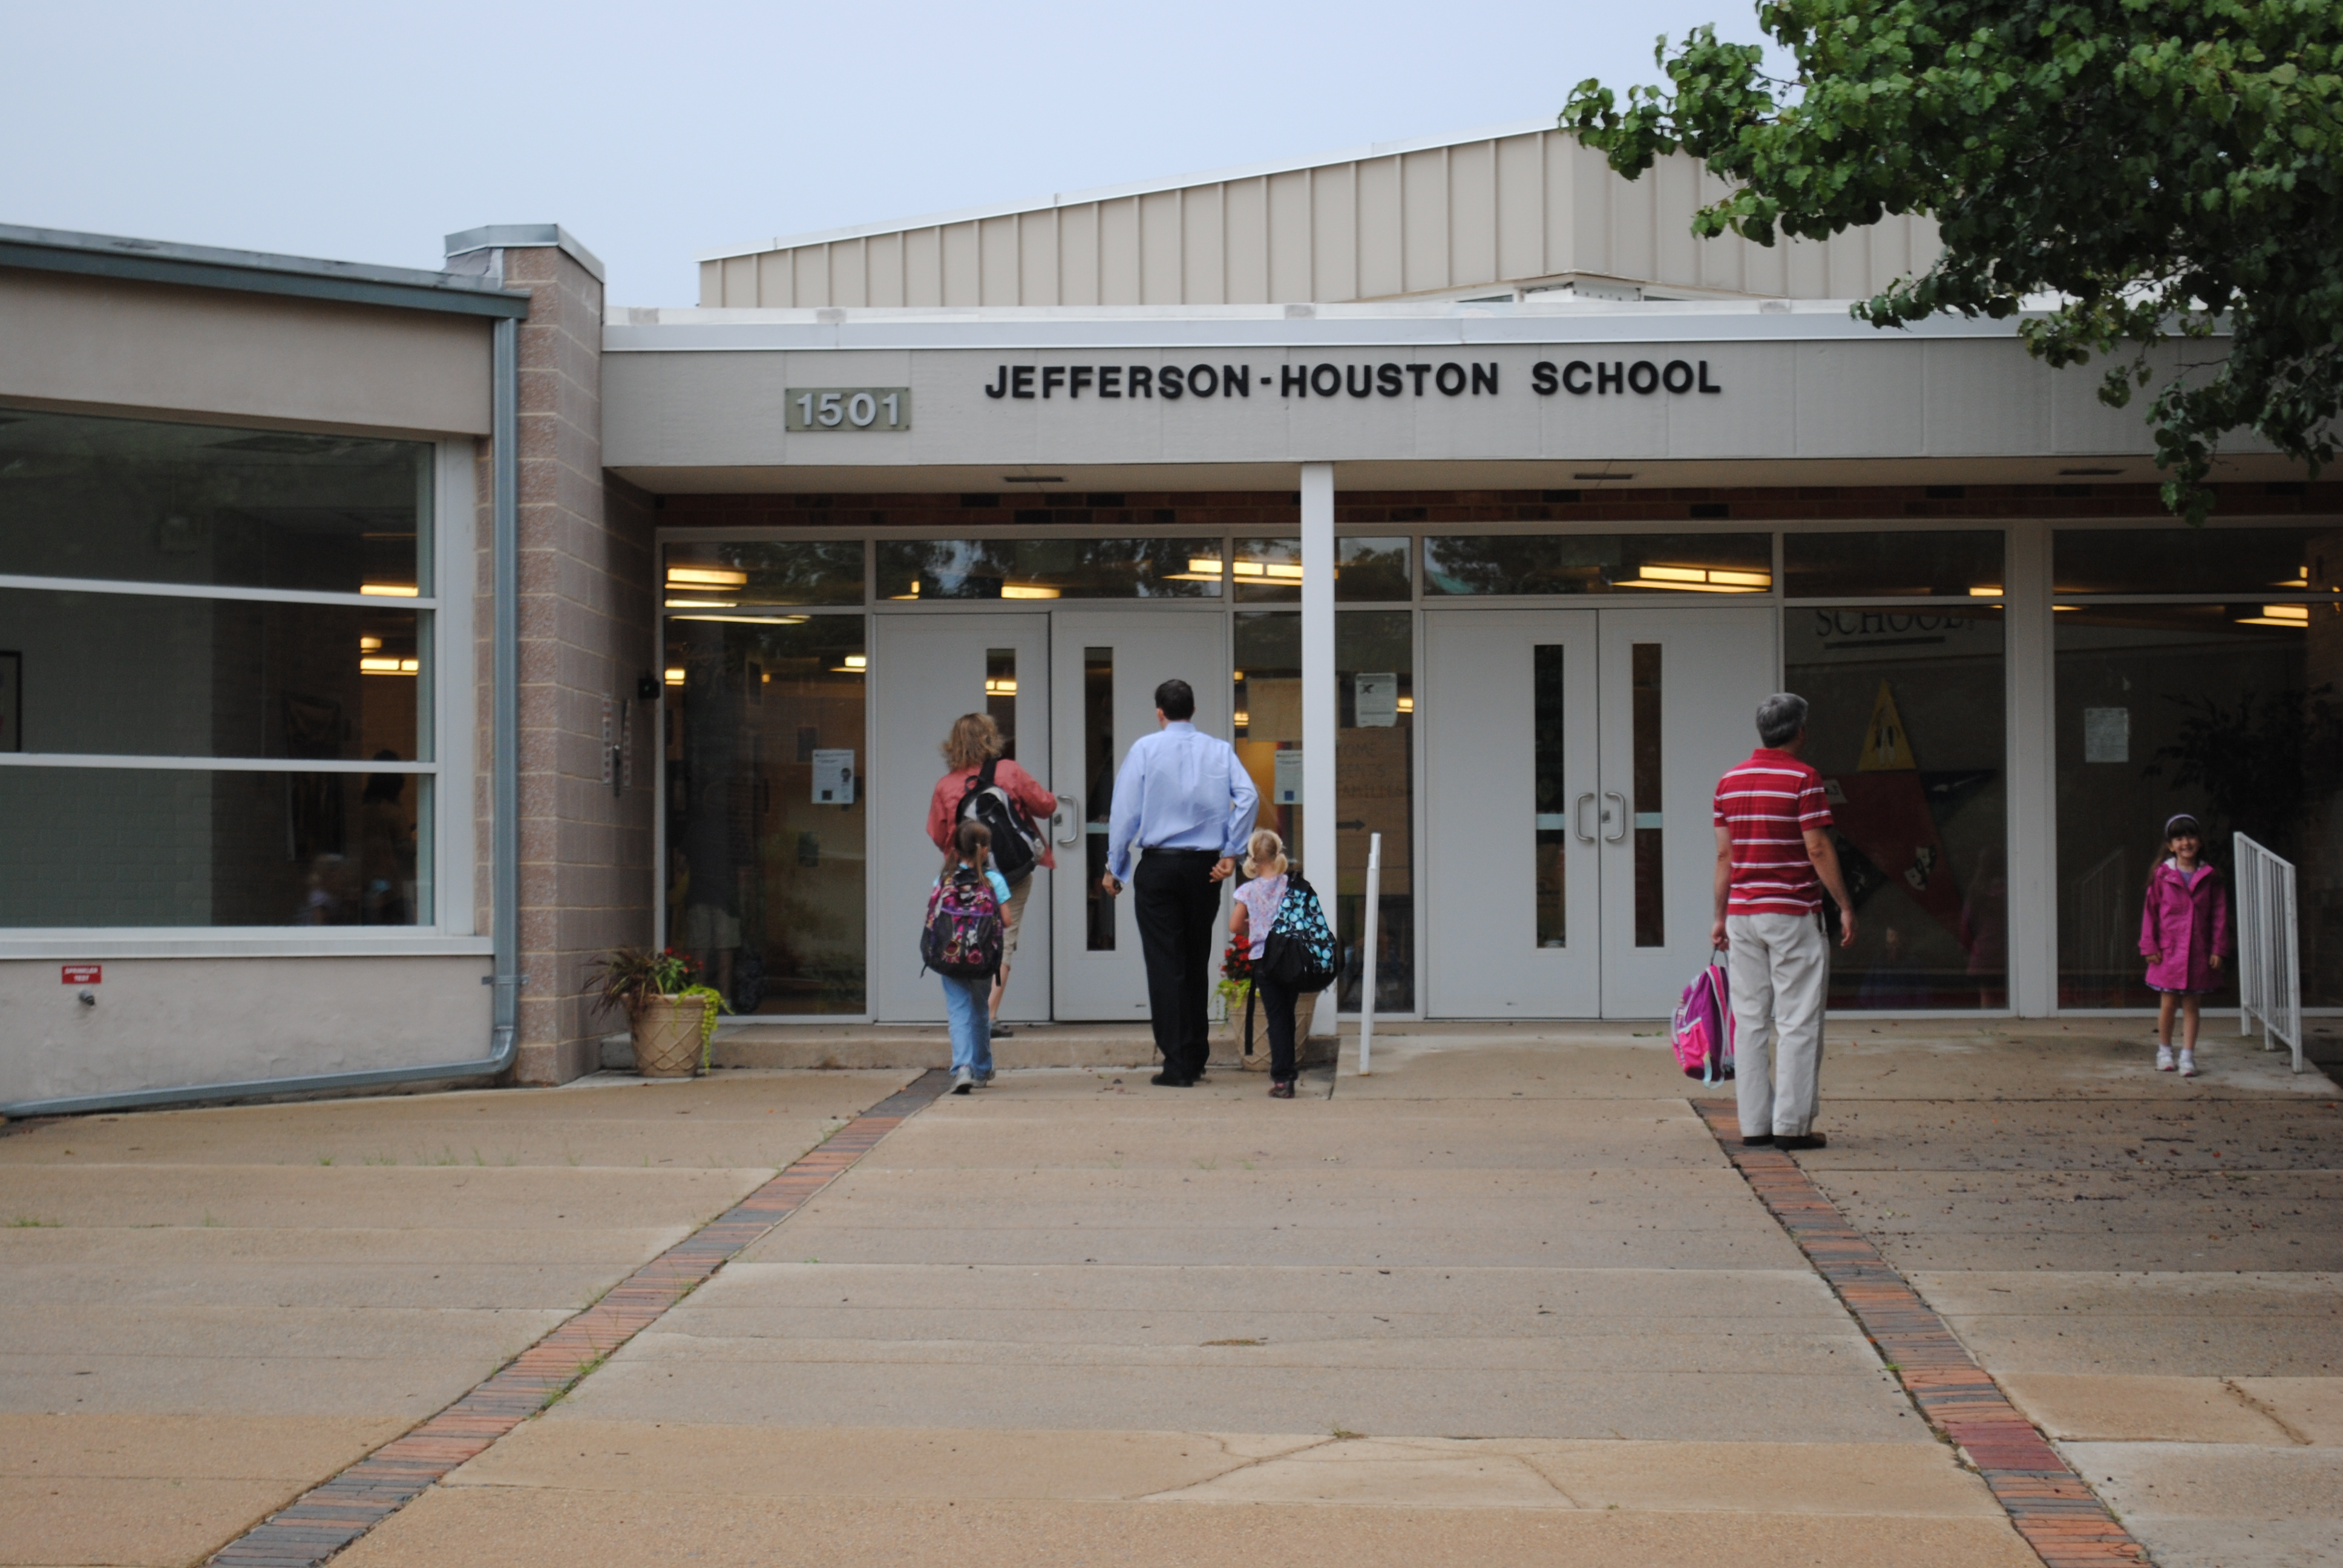 Jefferson-Houston was on the road to success, but no longer